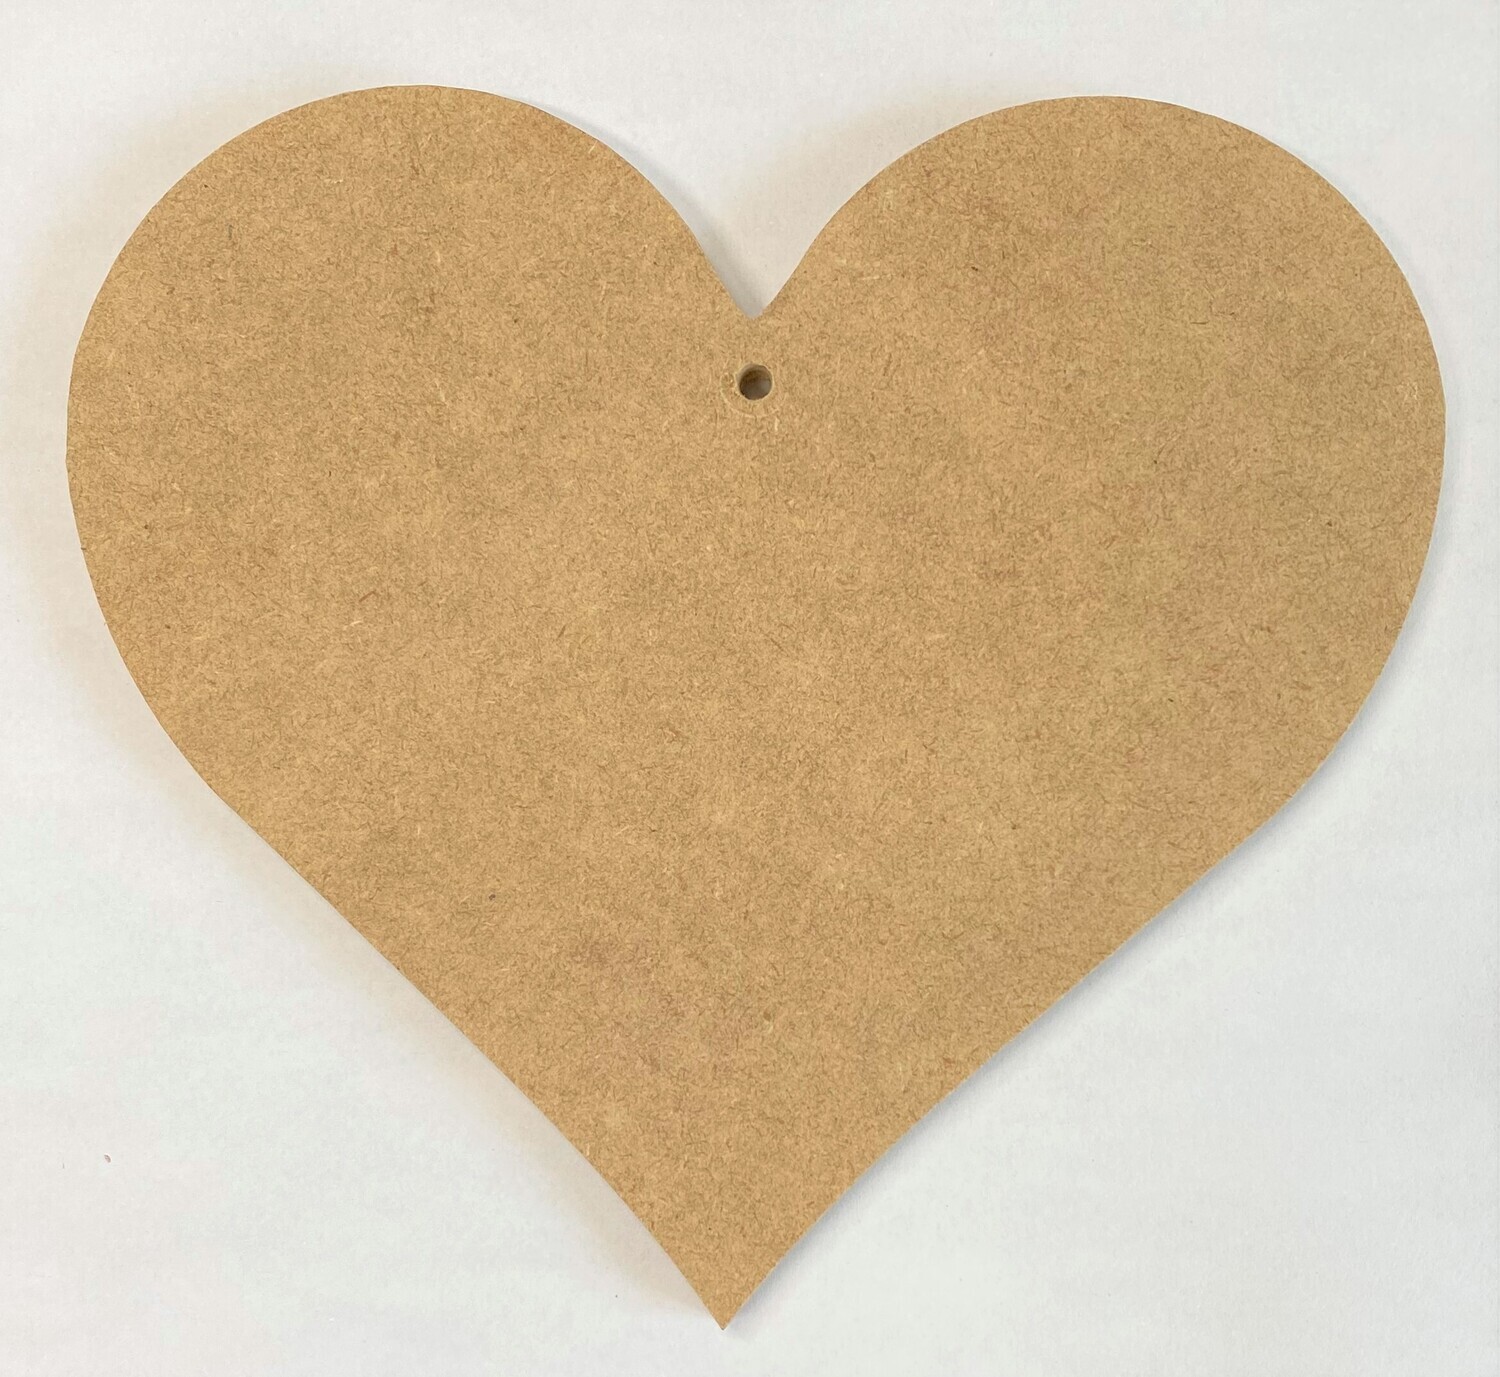 Heart 6" - 1/4" Thick MDF